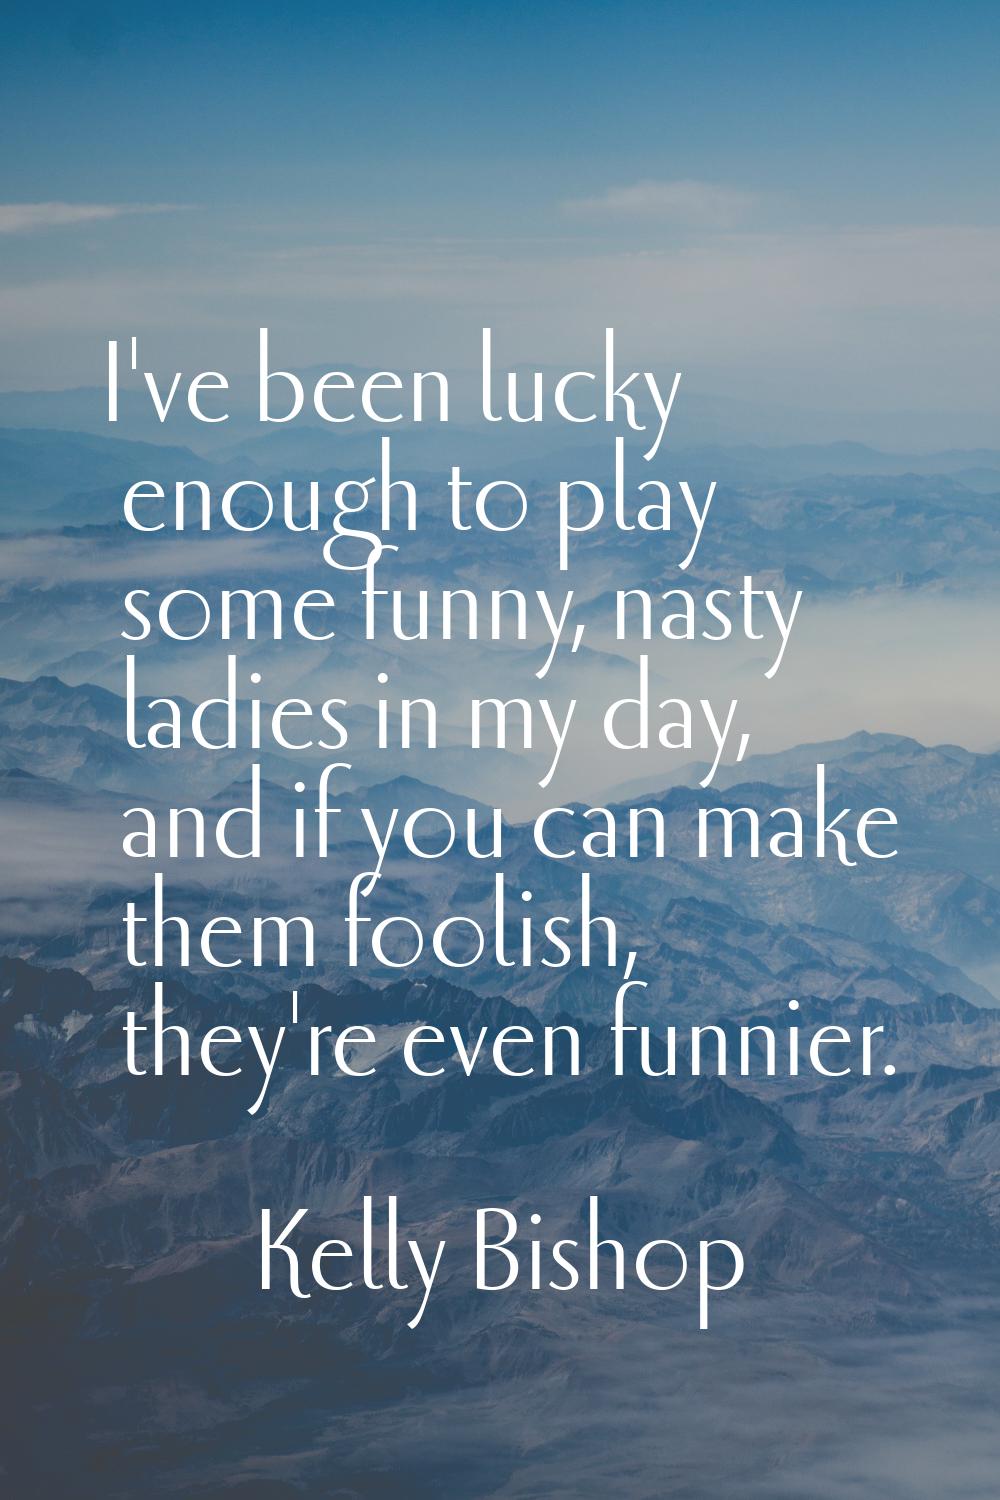 I've been lucky enough to play some funny, nasty ladies in my day, and if you can make them foolish